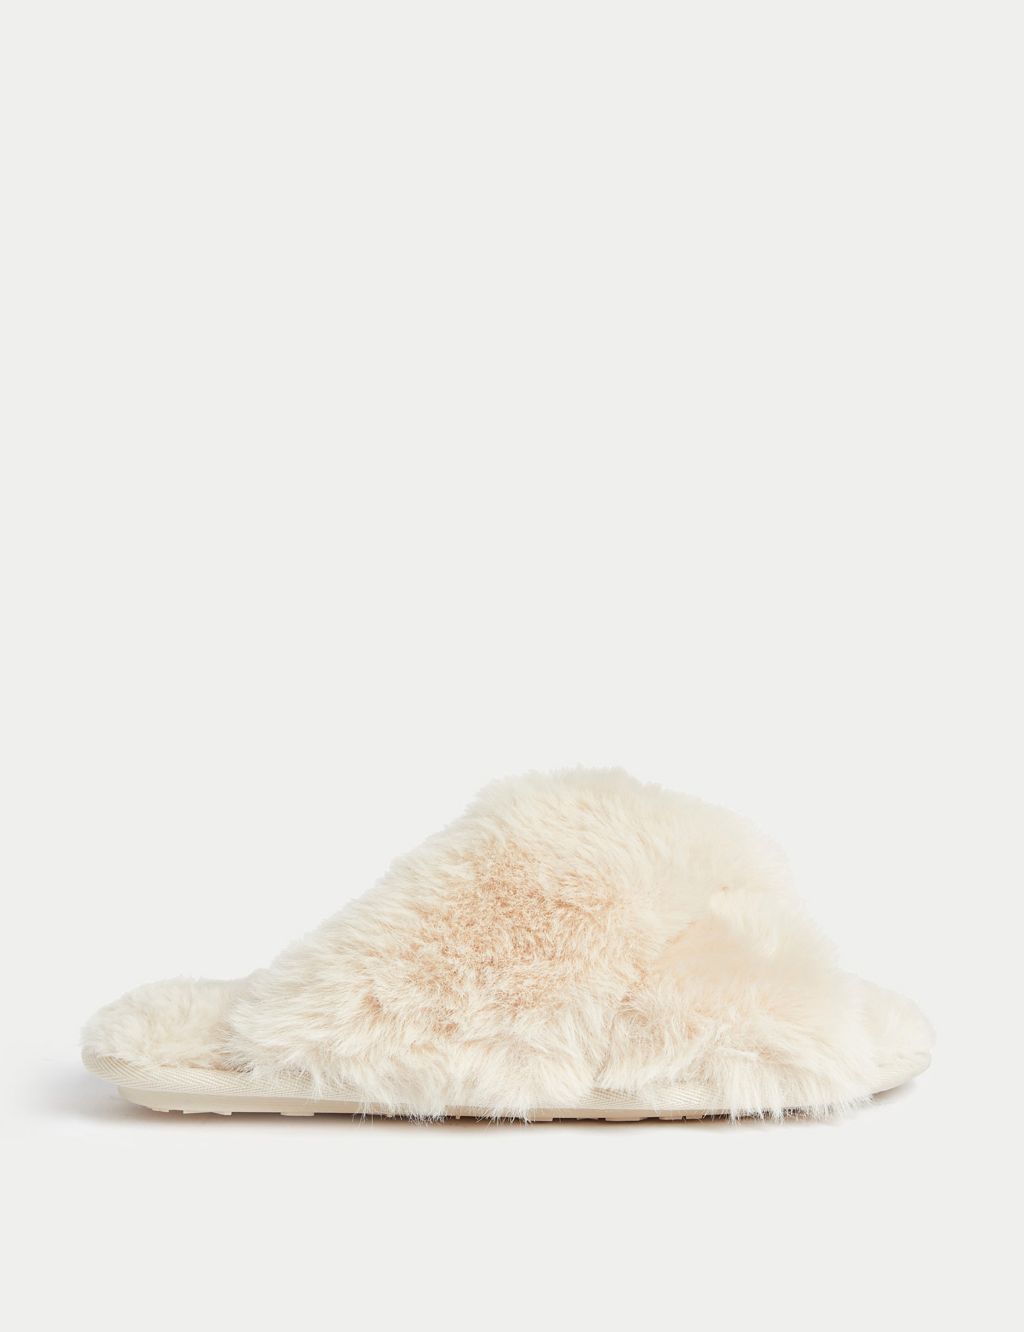 Buy Women’s Slippers from the M&S UK Online Shop